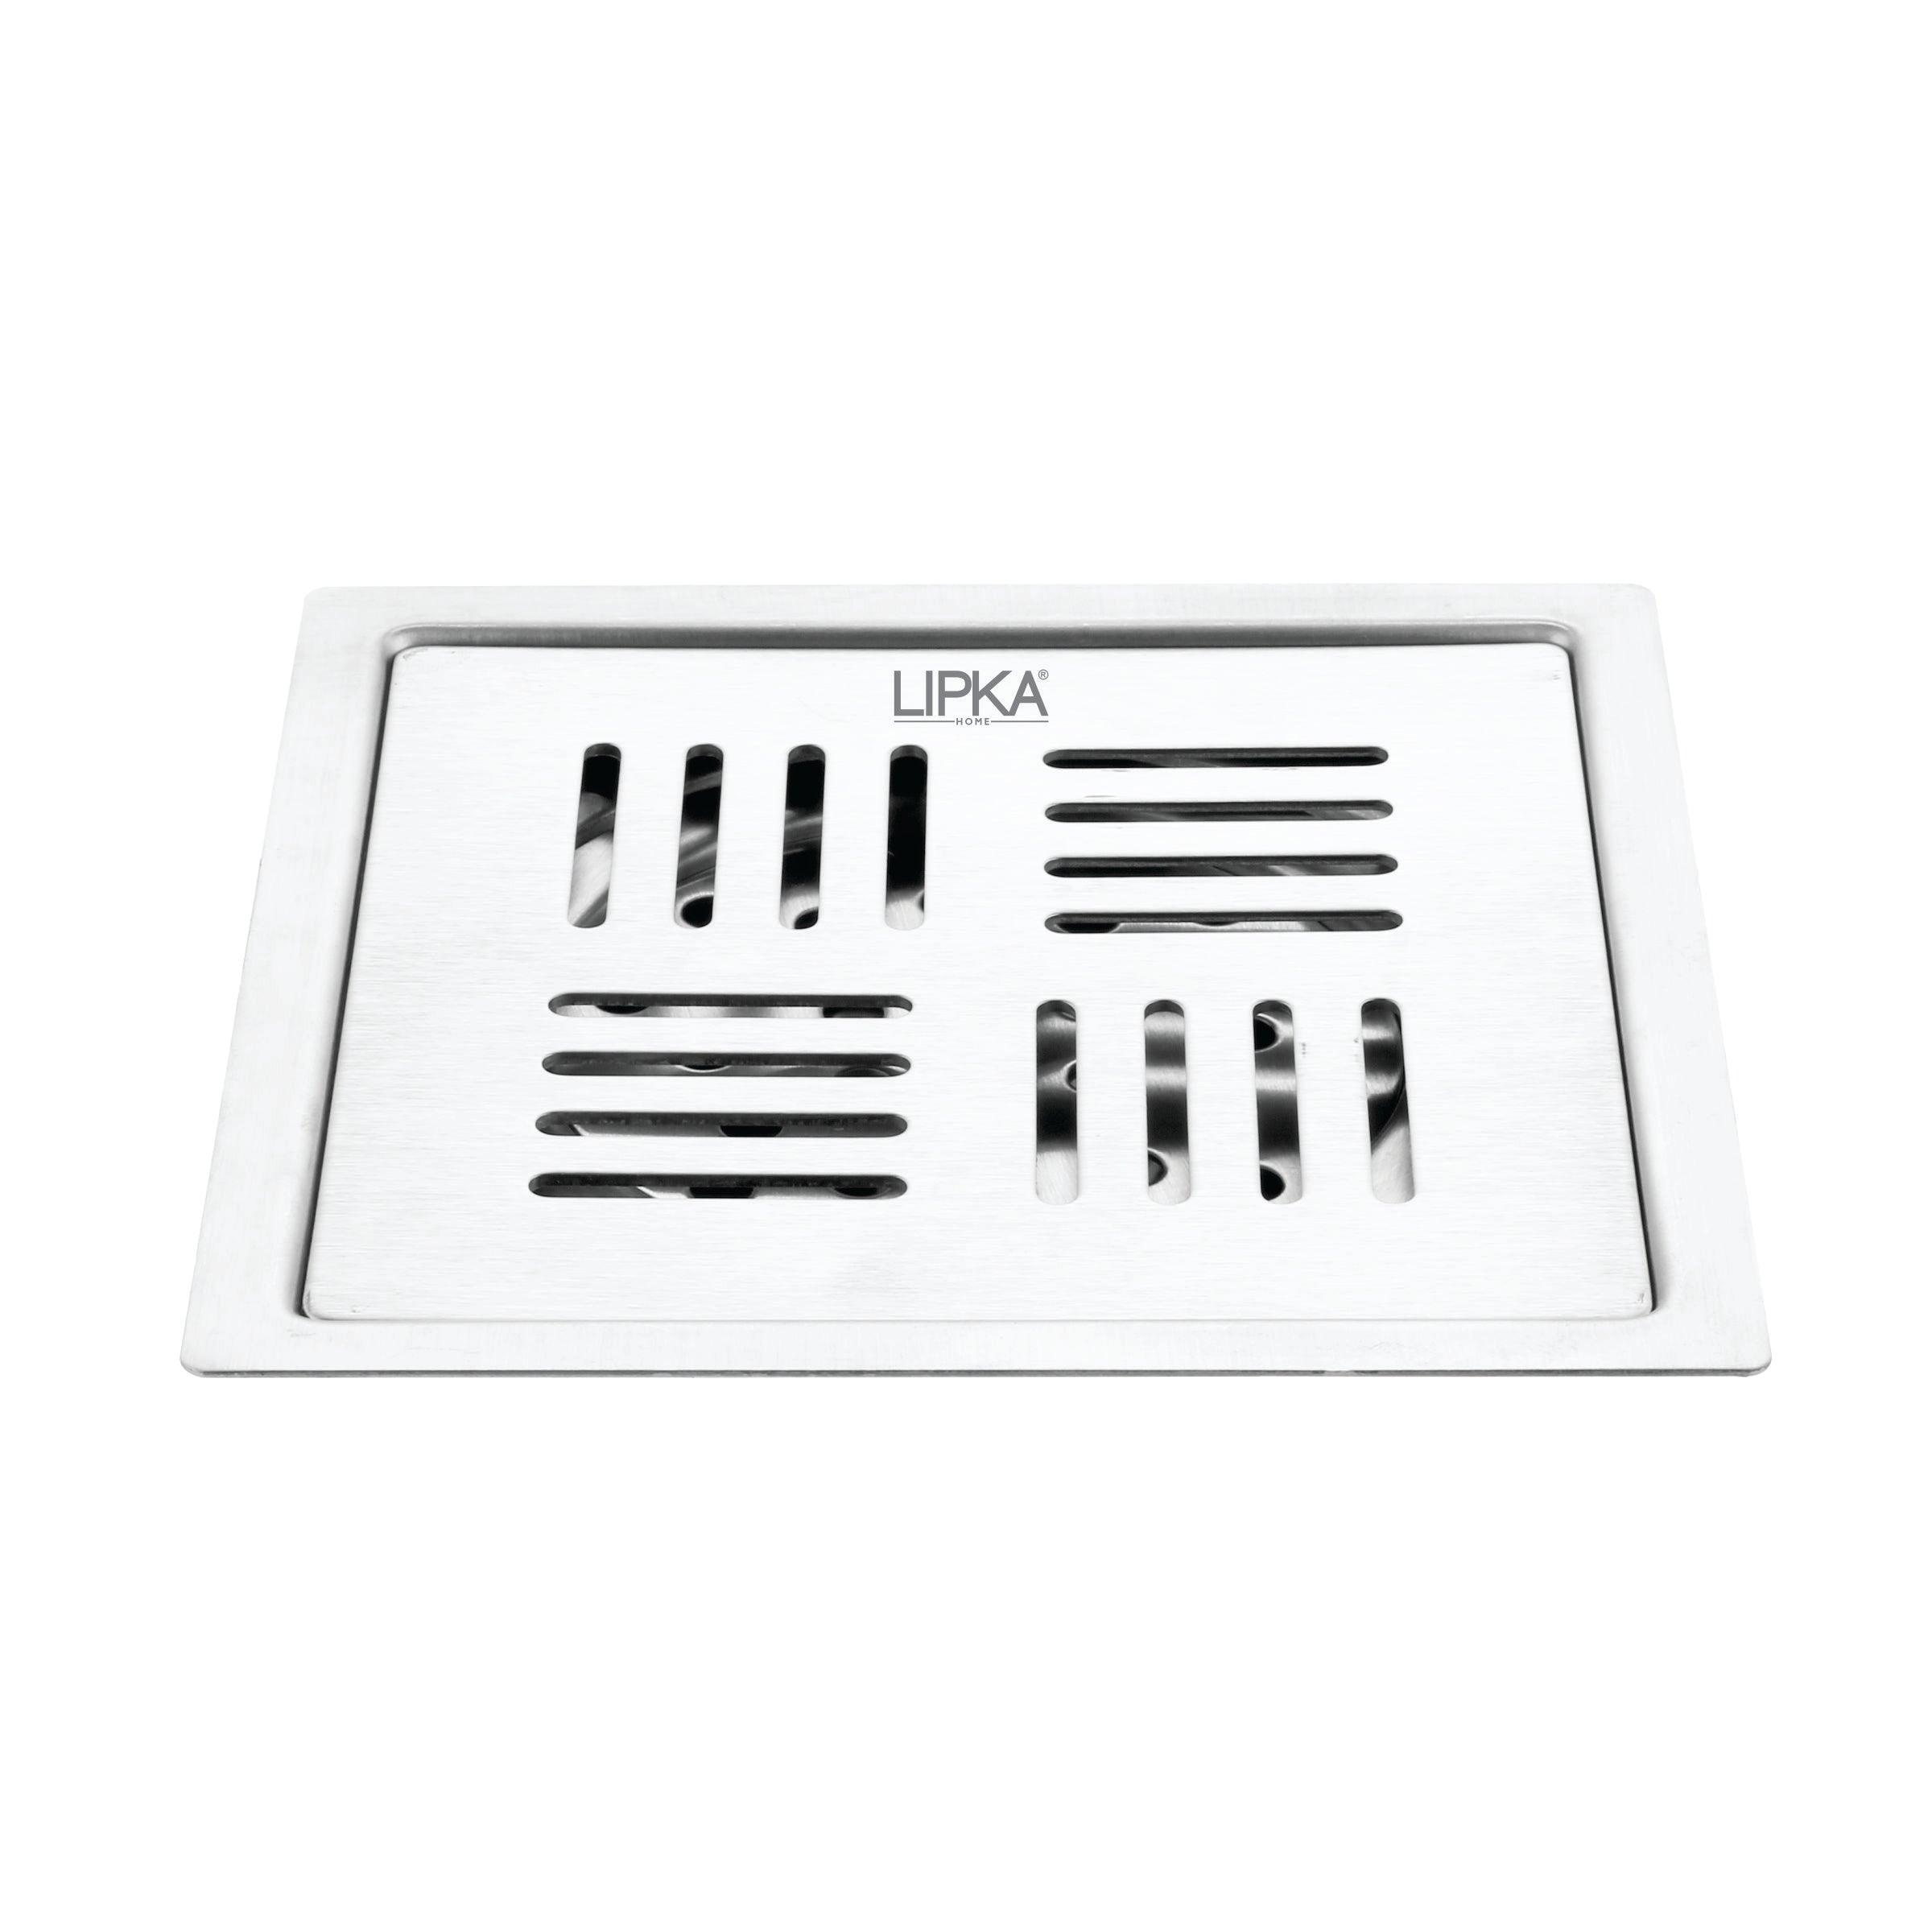 Alpha Deluxe Square Flat Cut Floor Drain (5 x 5 Inches)